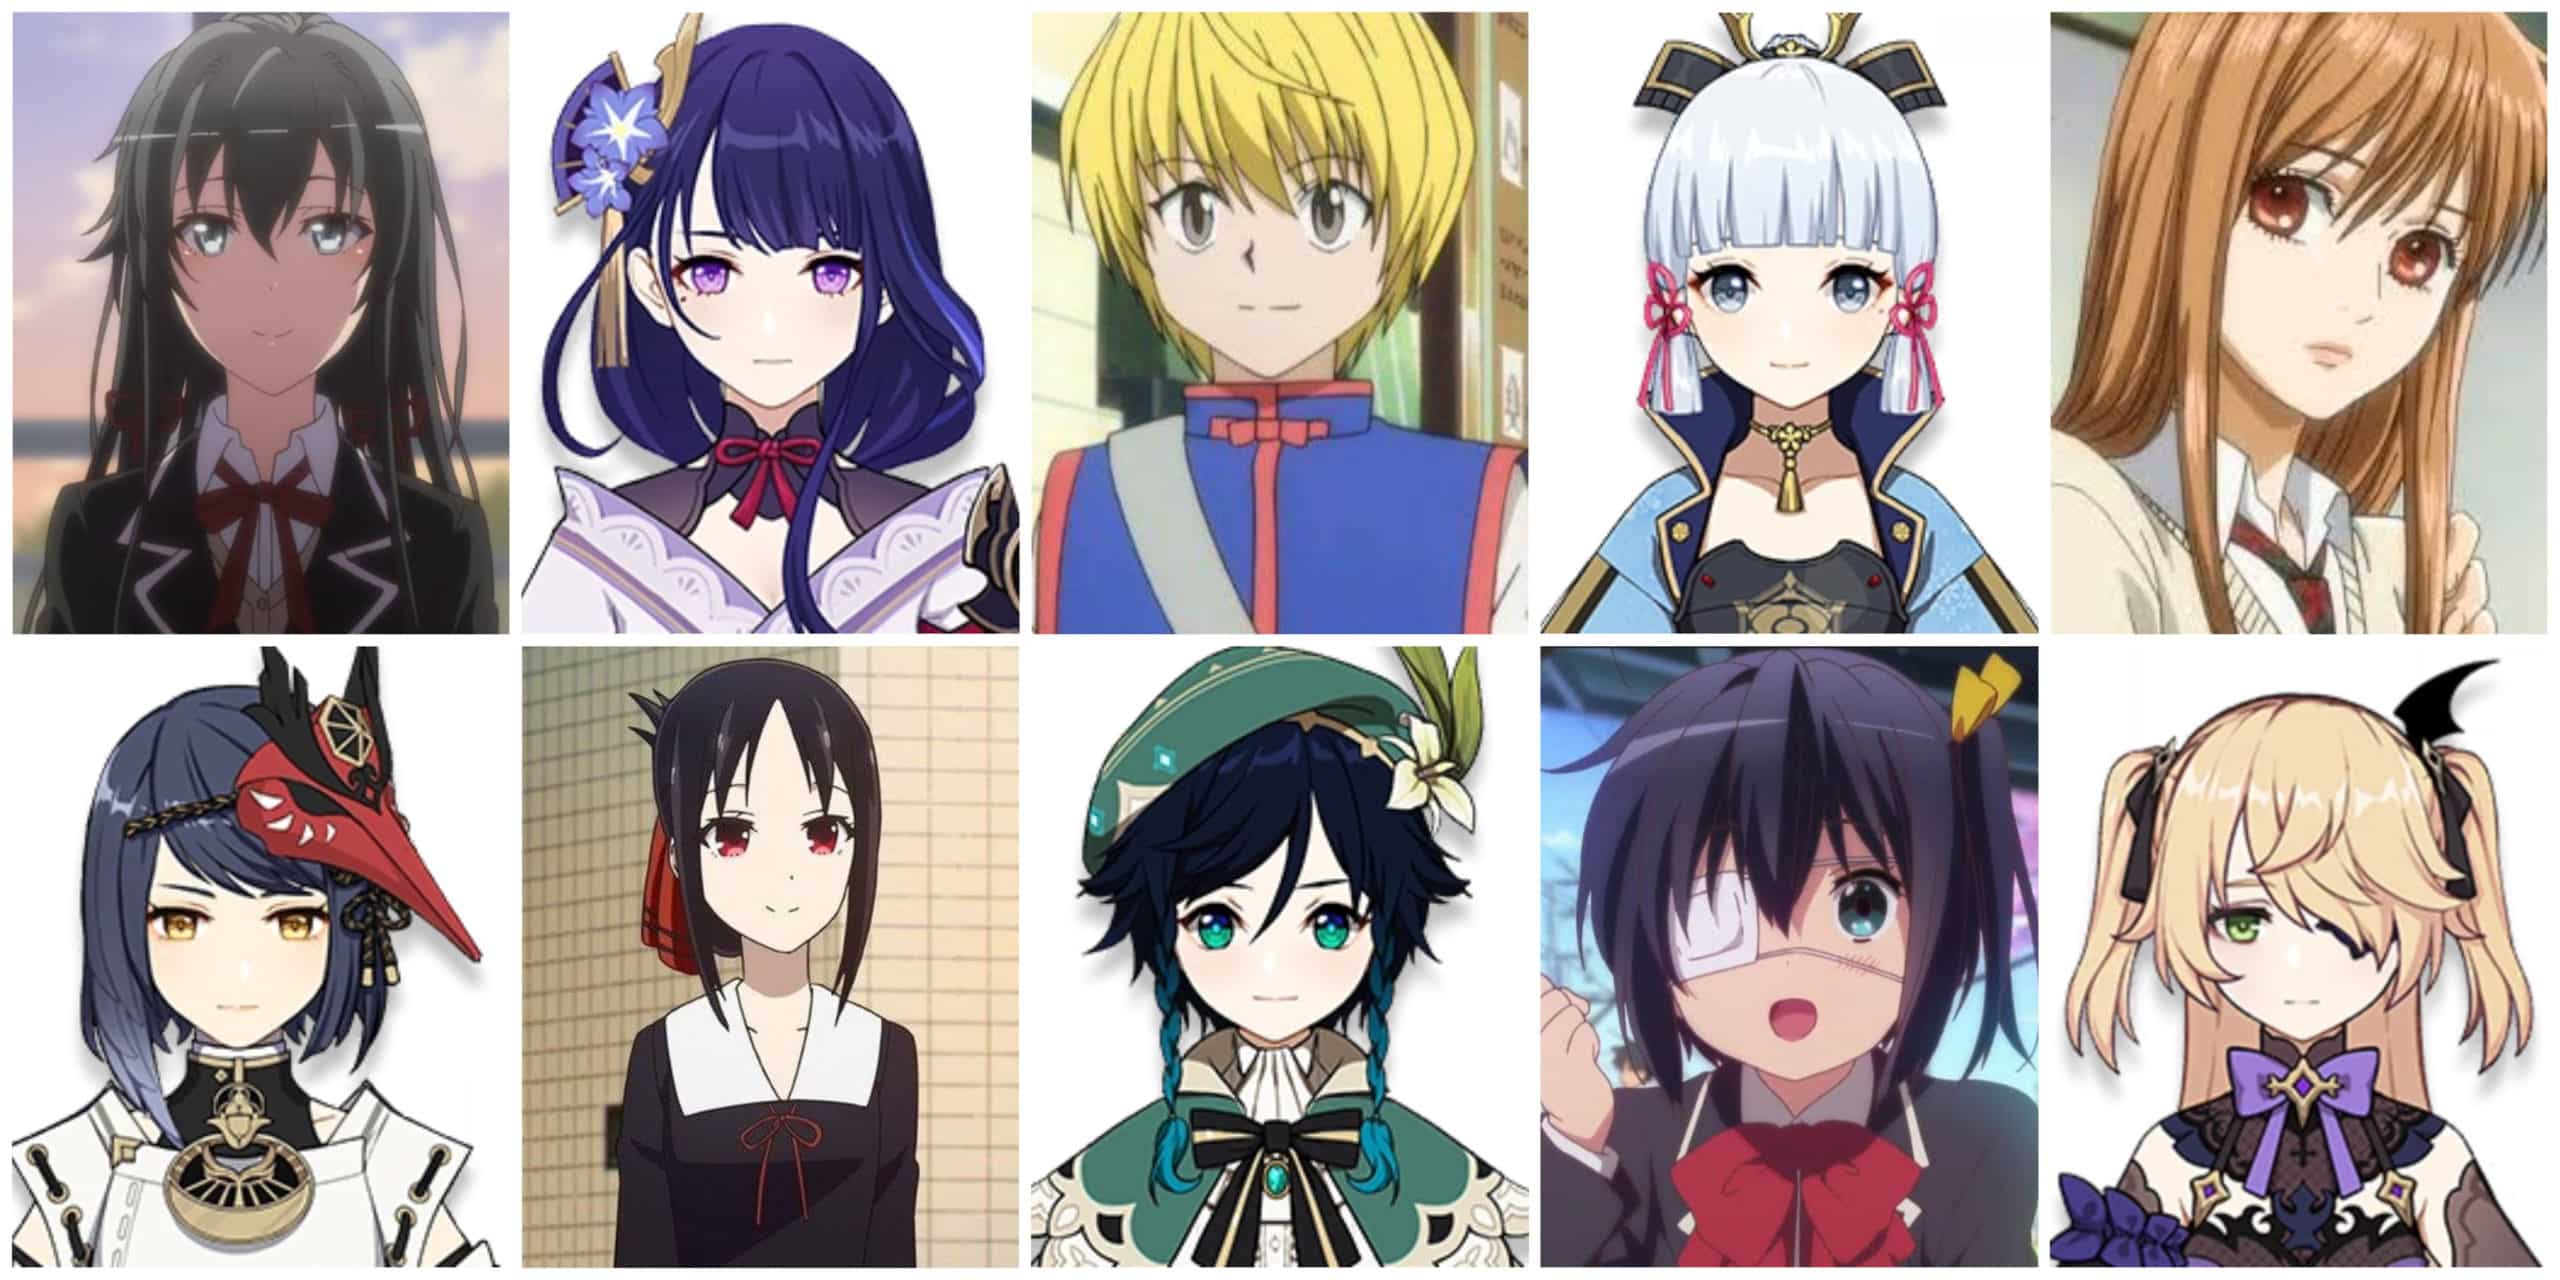 10 Genshin Impact Voice Actors and Their Anime Characters - WhatIfGaming